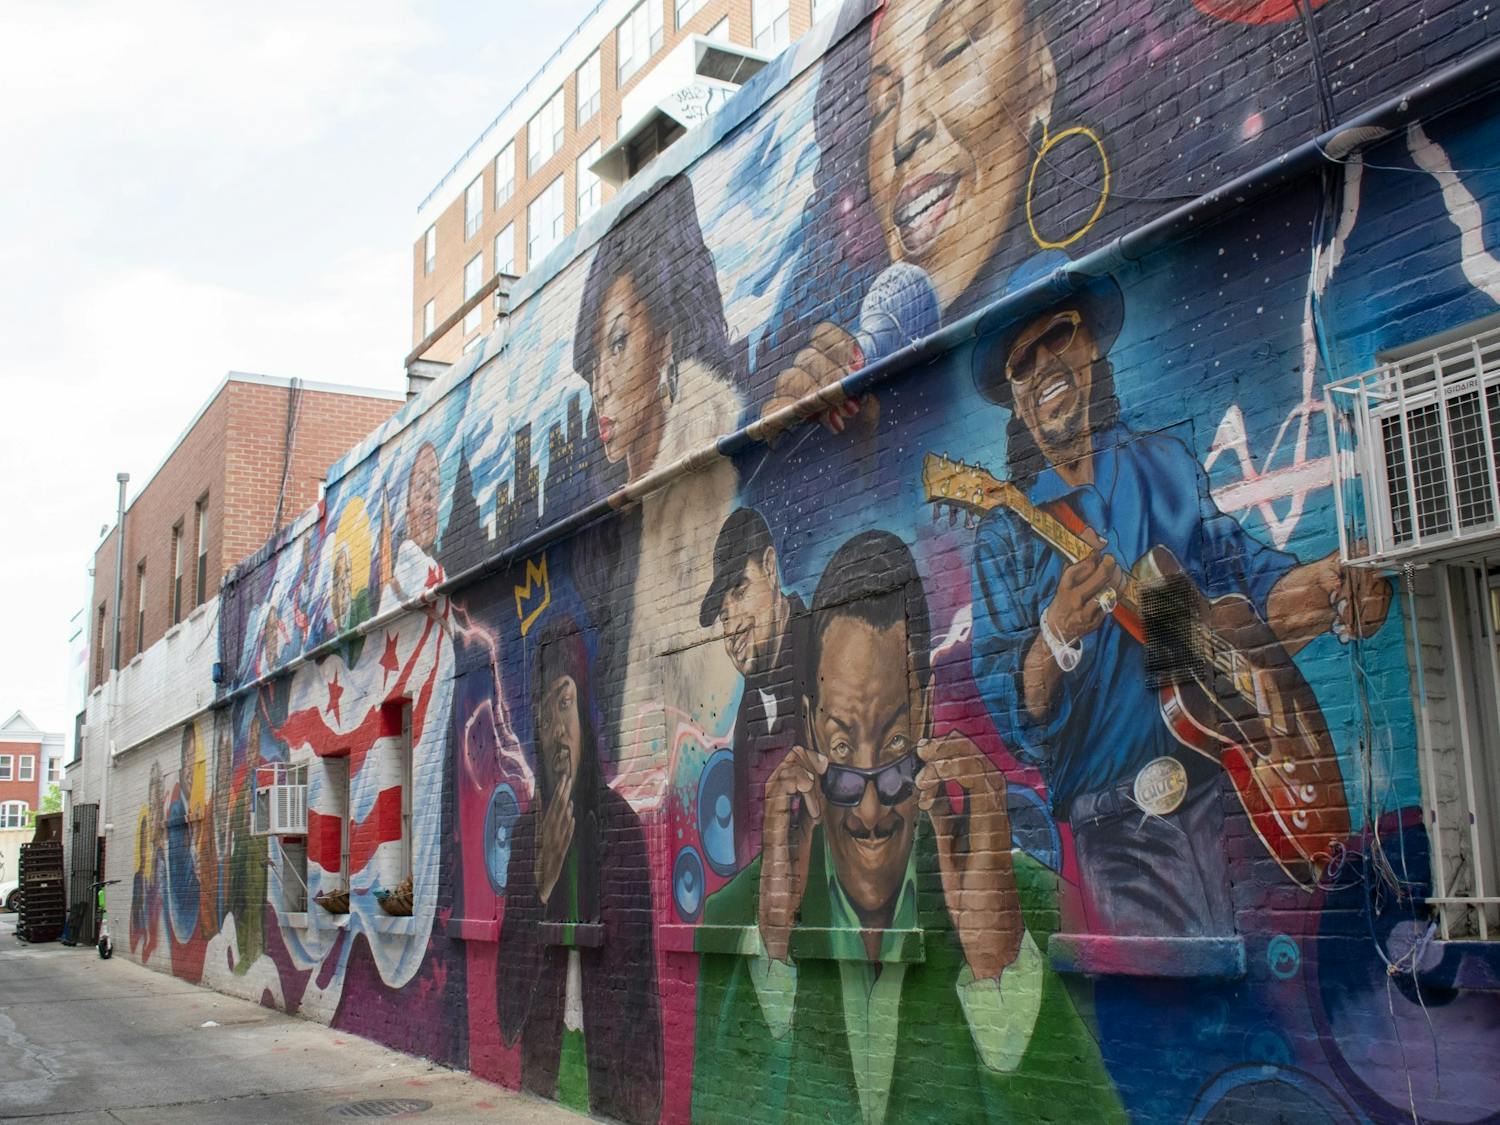 Organization MuralsDC helps artists paint the city’s history and future